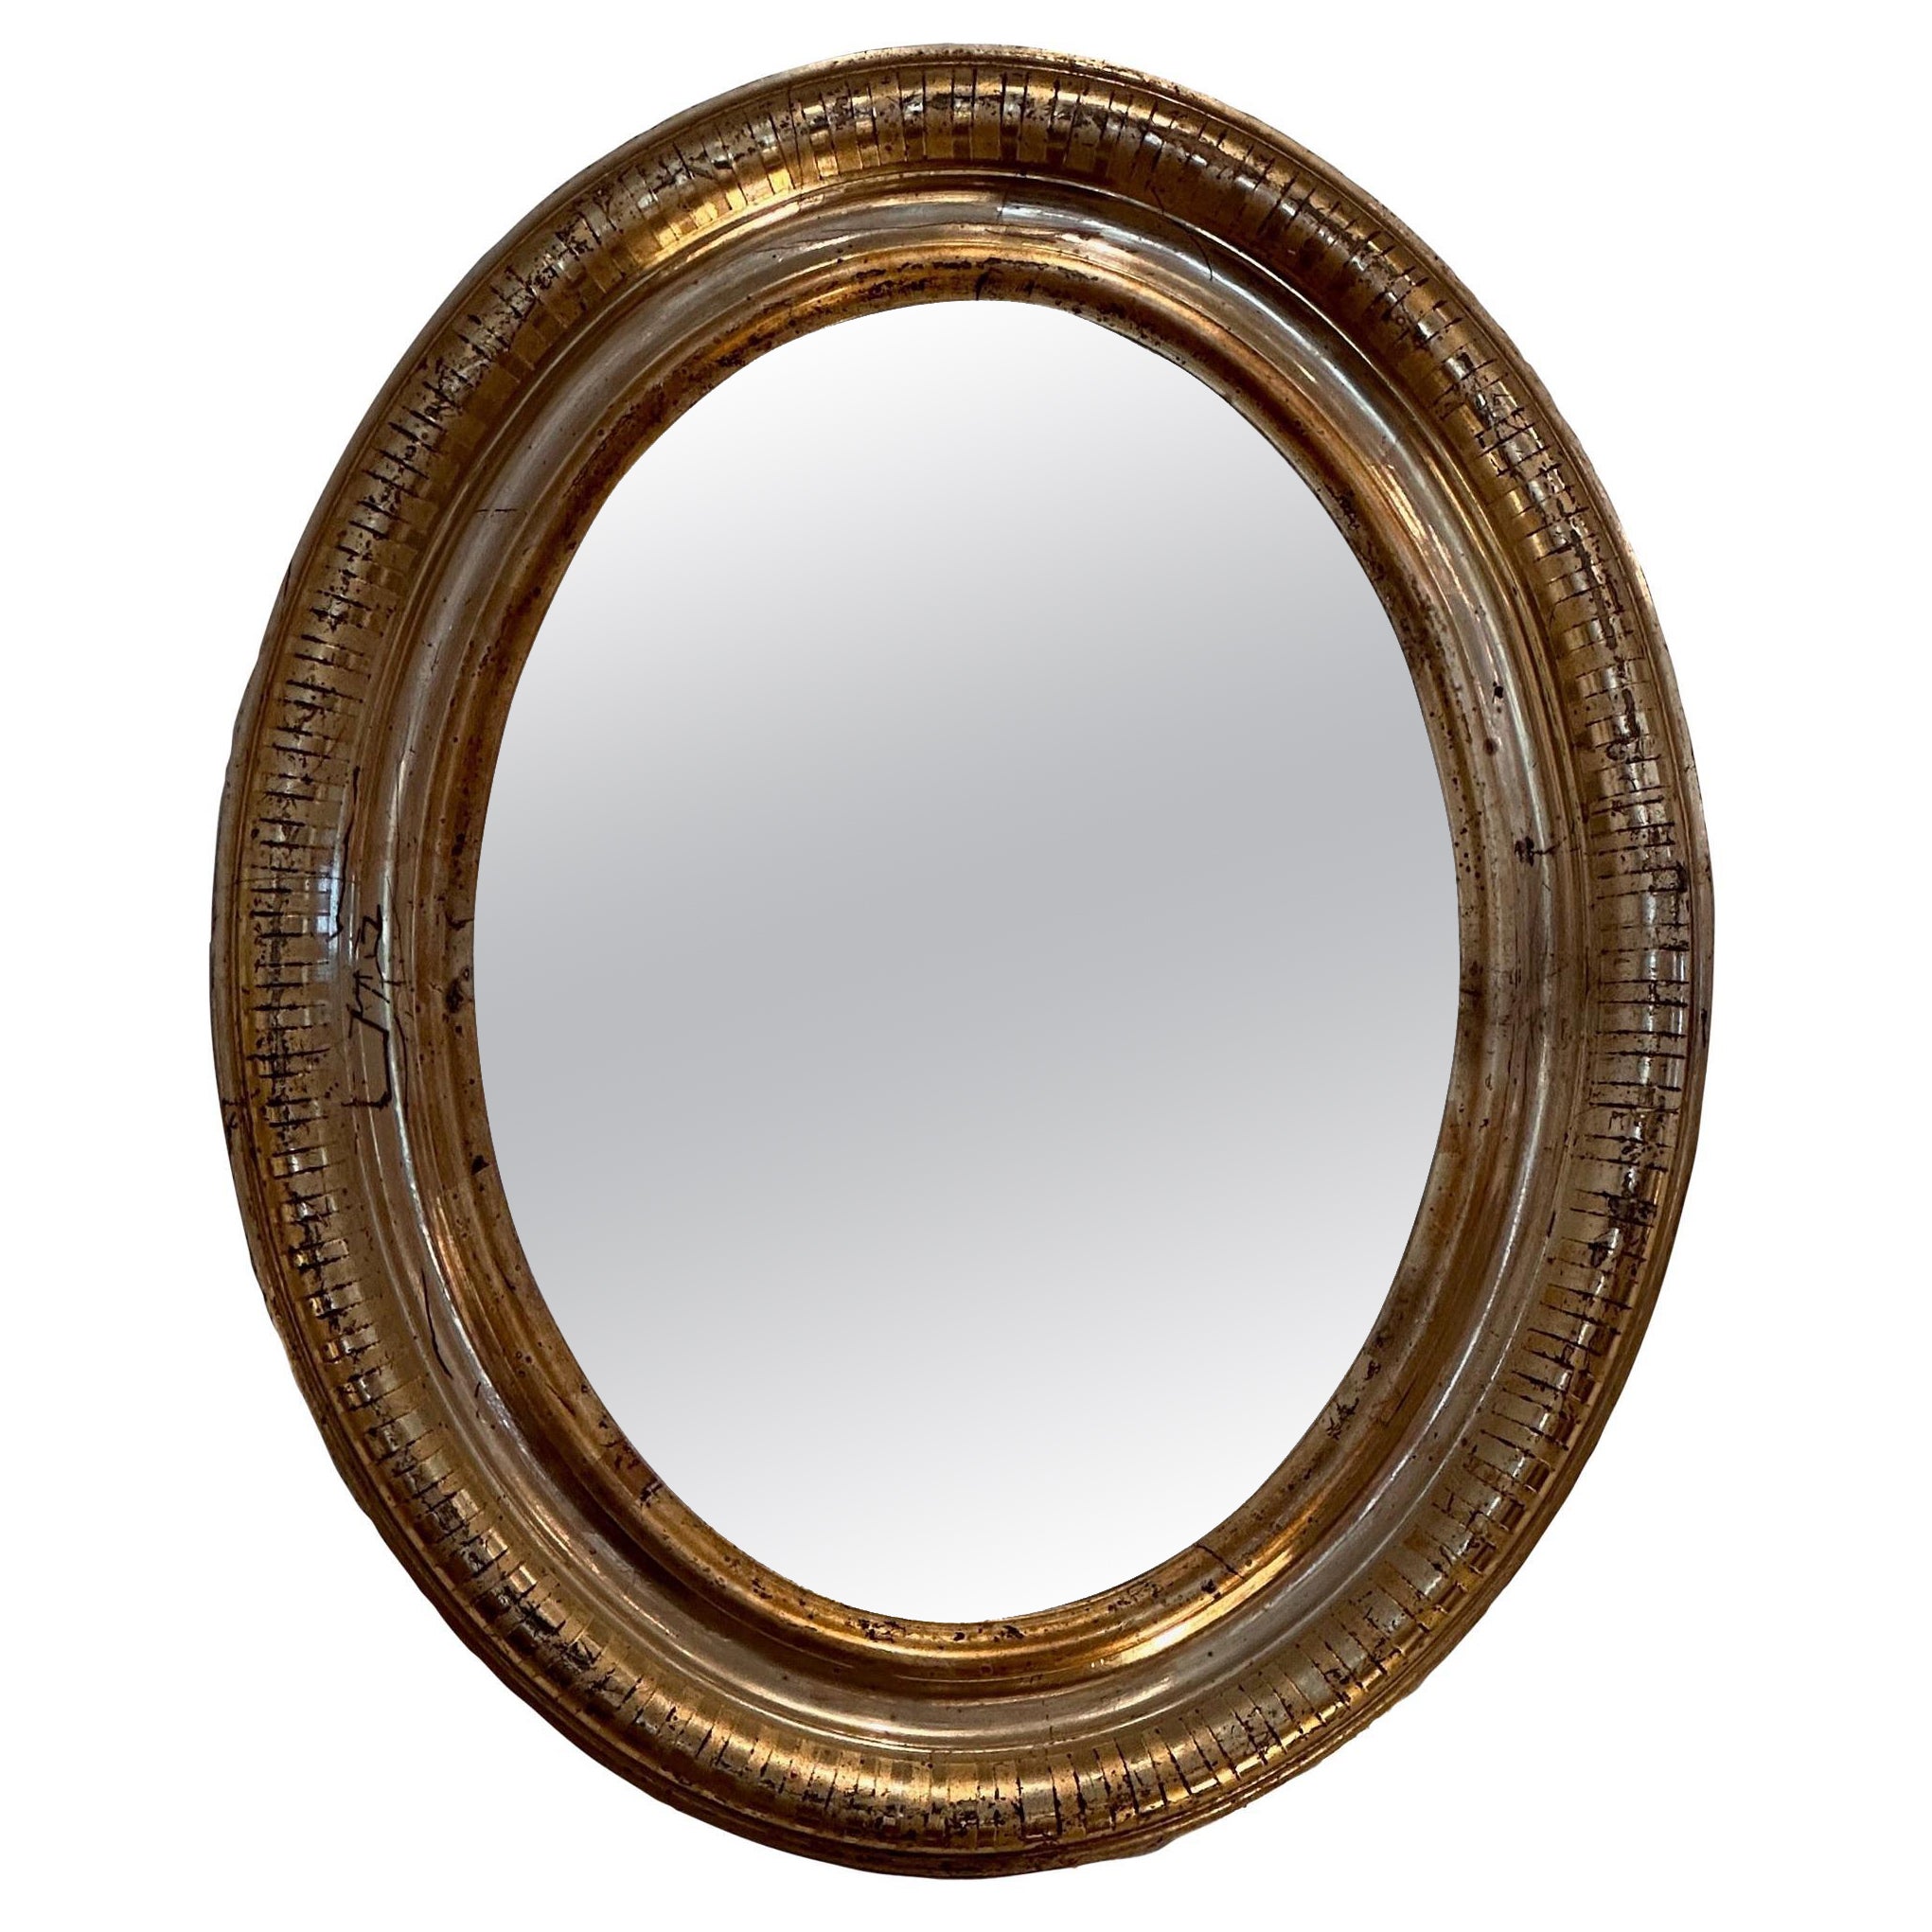 Late 19th Century Small Oval Mirror